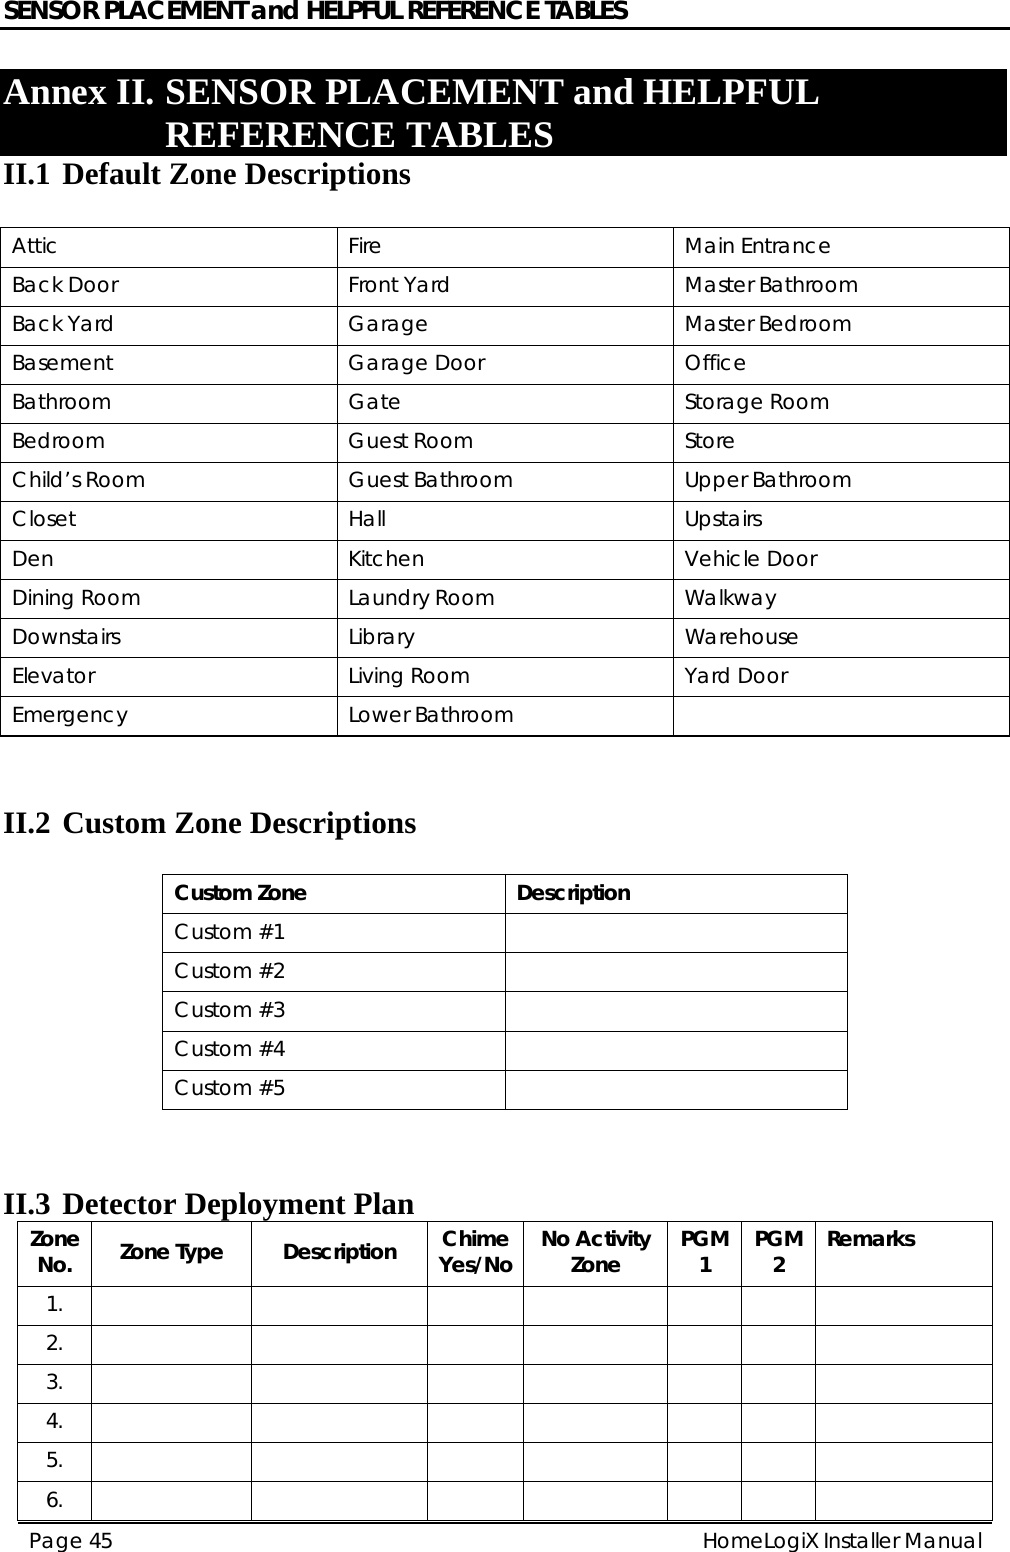 SENSOR PLACEMENT and HELPFUL REFERENCE TABLES HomeLogiX Installer Manual Page 45  Annex II. SENSOR PLACEMENT and HELPFUL REFERENCE TABLES  II.1 Default Zone Descriptions  Attic Fire  Main Entrance Back Door  Front Yard  Master Bathroom Back Yard  Garage  Master Bedroom Basement Garage Door Office Bathroom Gate  Storage Room Bedroom Guest Room Store Child’s Room  Guest Bathroom Upper Bathroom Closet Hall  Upstairs Den Kitchen Vehicle Door Dining Room  Laundry Room  Walkway Downstairs Library  Warehouse Elevator  Living Room  Yard Door Emergency Lower Bathroom    II.2 Custom Zone Descriptions  Custom Zone  Description Custom #1   Custom #2   Custom #3   Custom #4   Custom #5     II.3 Detector Deployment Plan Zone  No.  Zone Type  Description  Chime Yes/No No Activity Zone  PGM 1  PGM 2  Remarks      1.            2.            3.            4.            5.            6.            